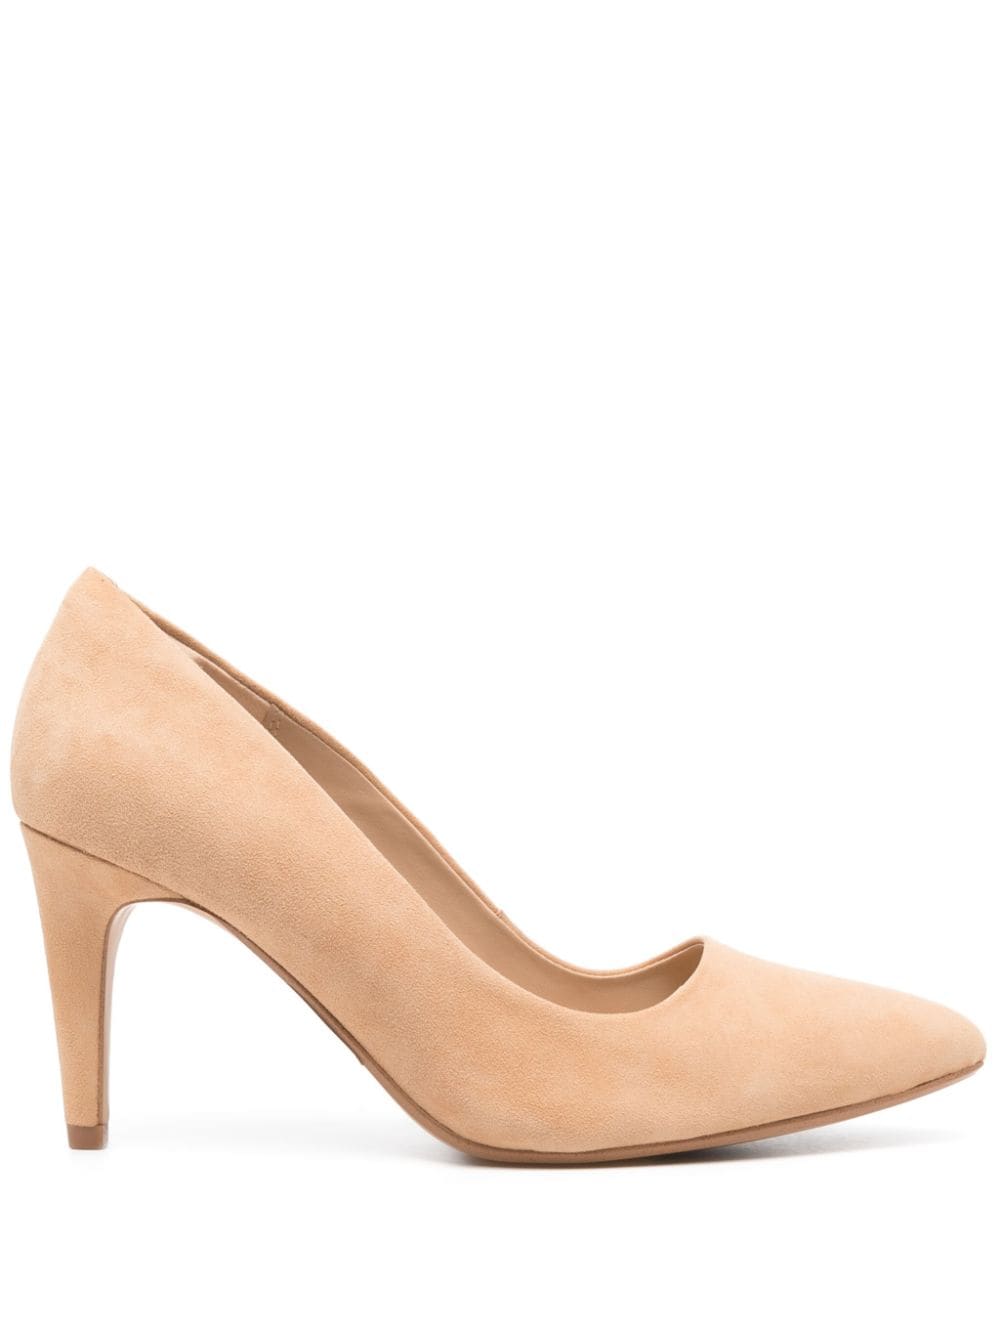 Image 1 of Clarks 75mm Laina Rae suede pumps